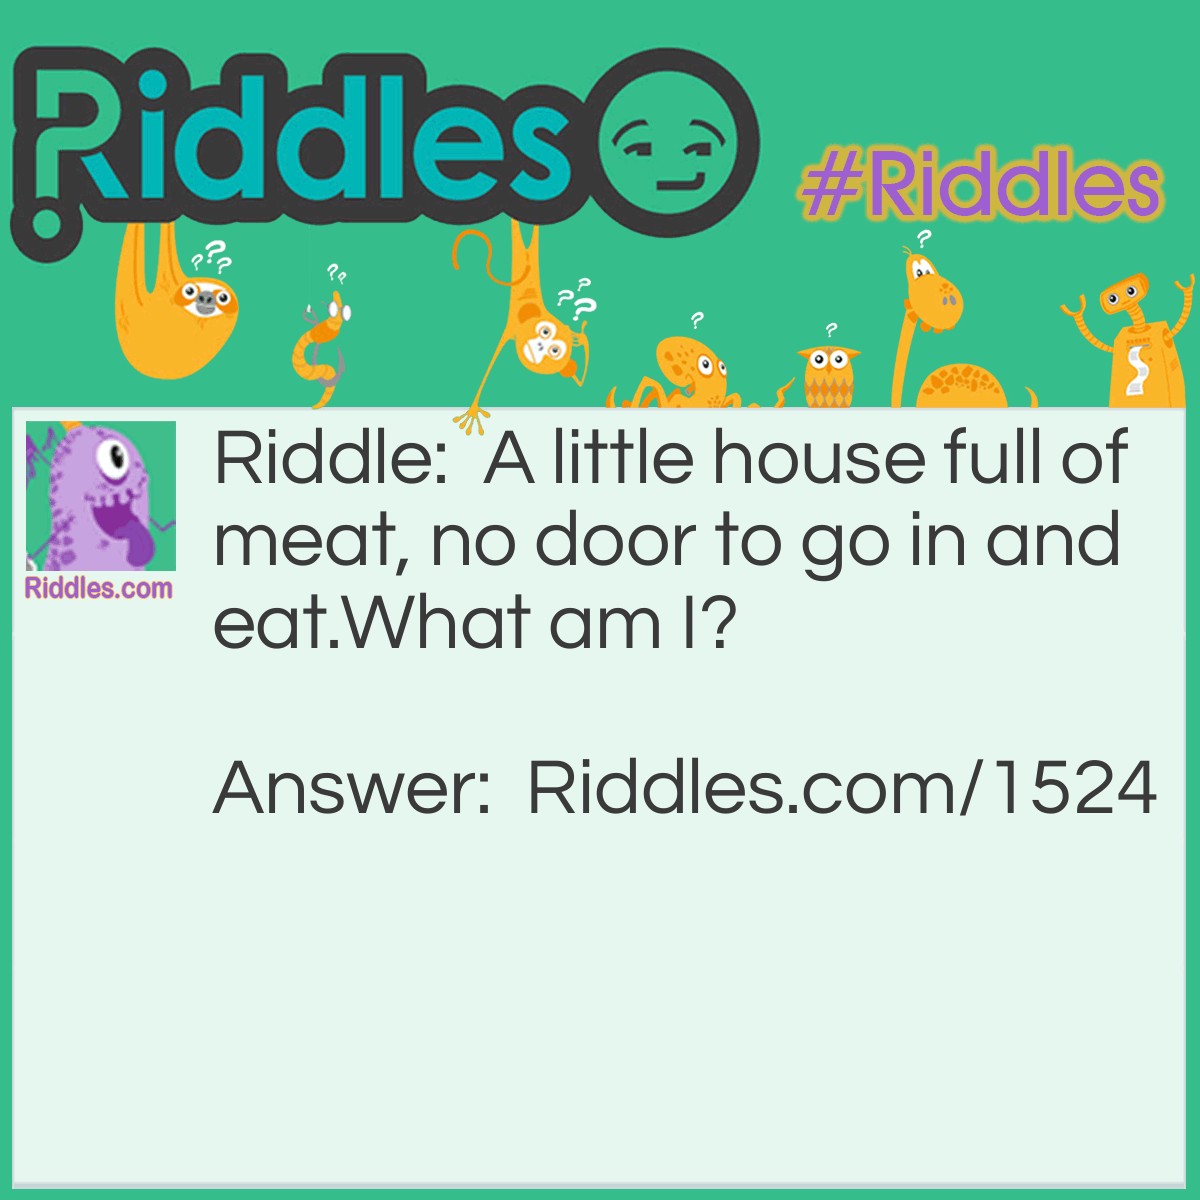 Riddle: A little house full of meat, no door to go in and eat.
What am I? Answer: A Nut.